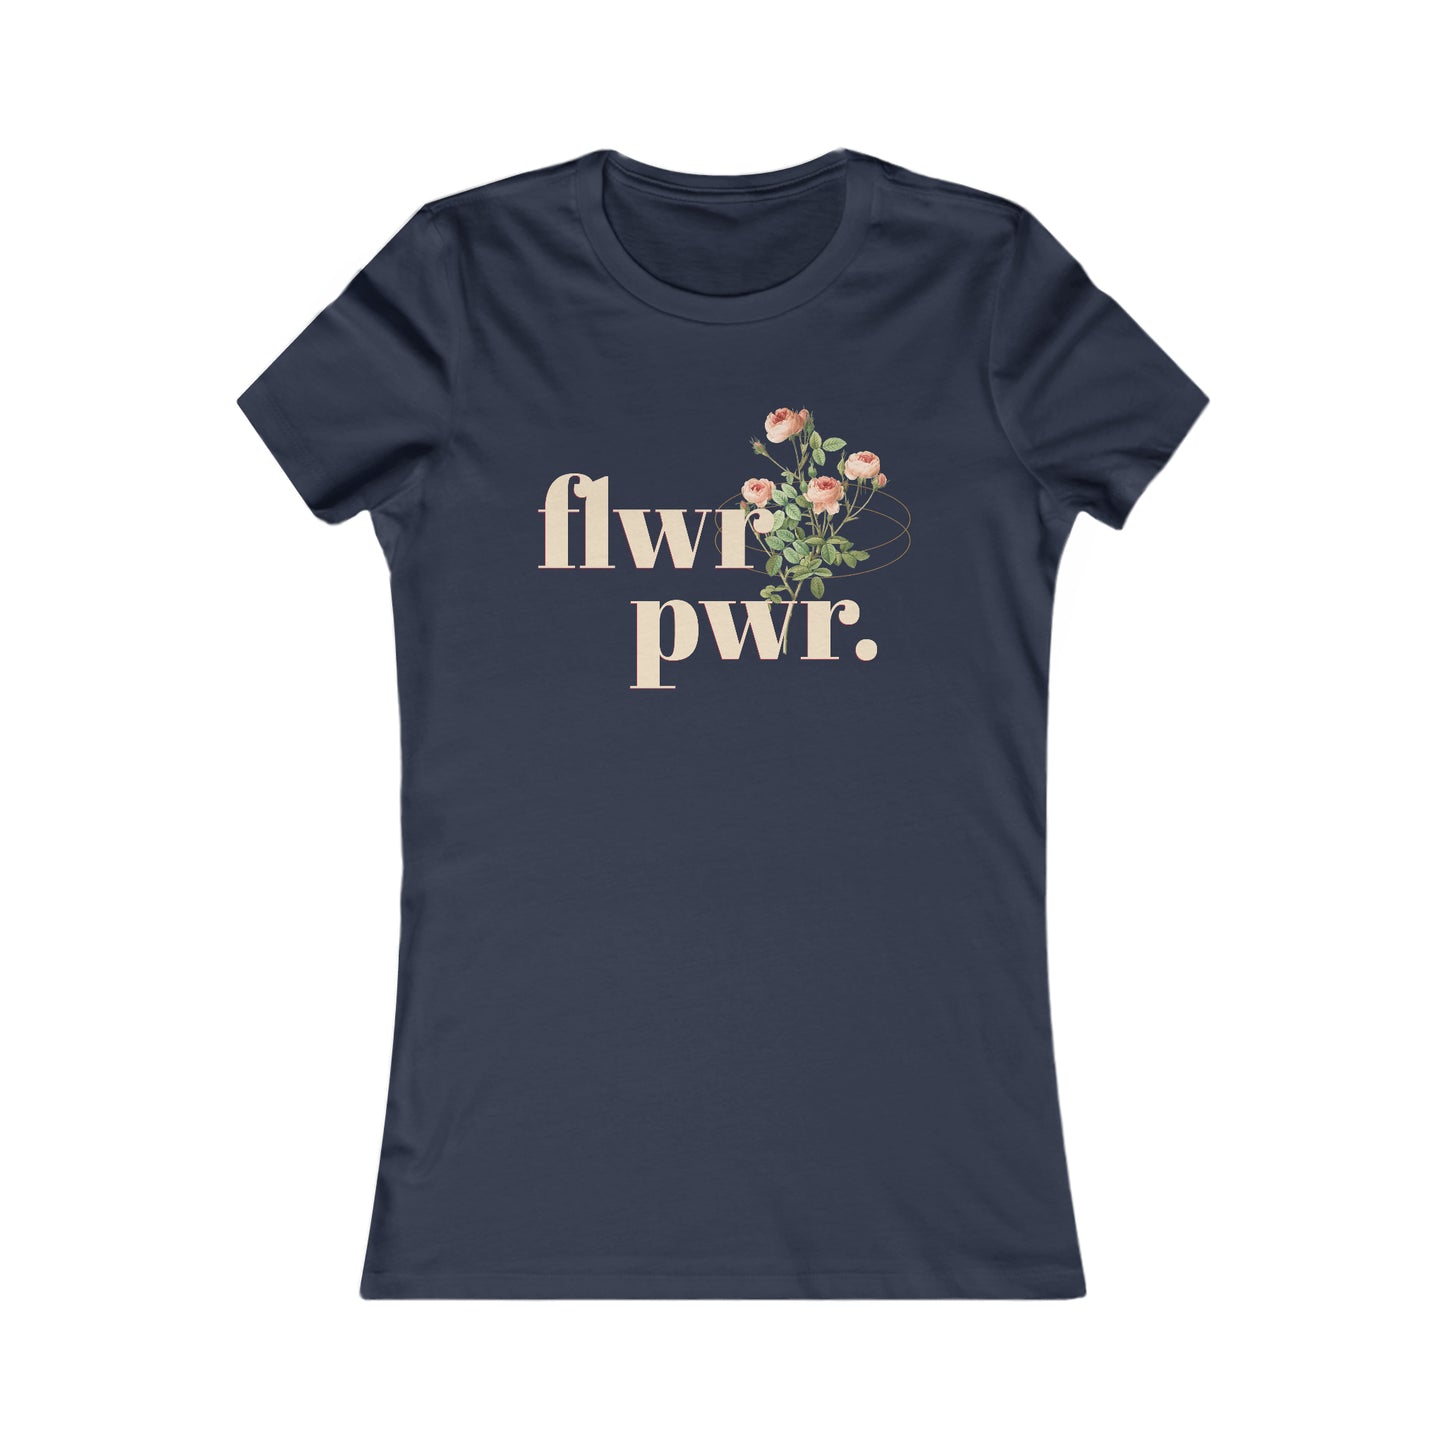 flwr pwr graphic tee